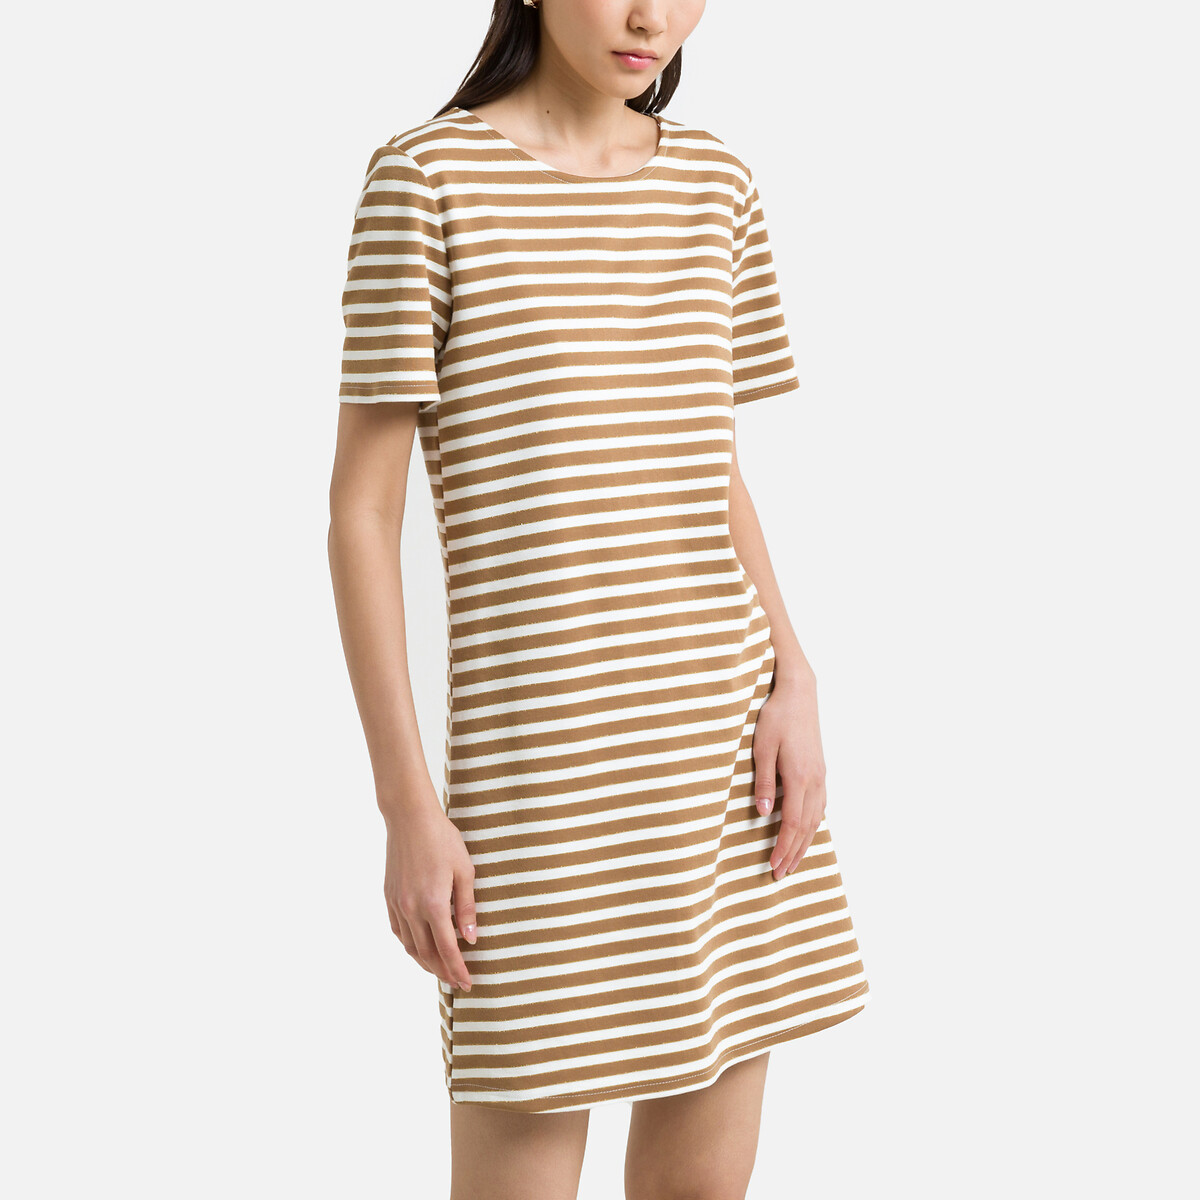 Striped mini dress with short sleeves ...